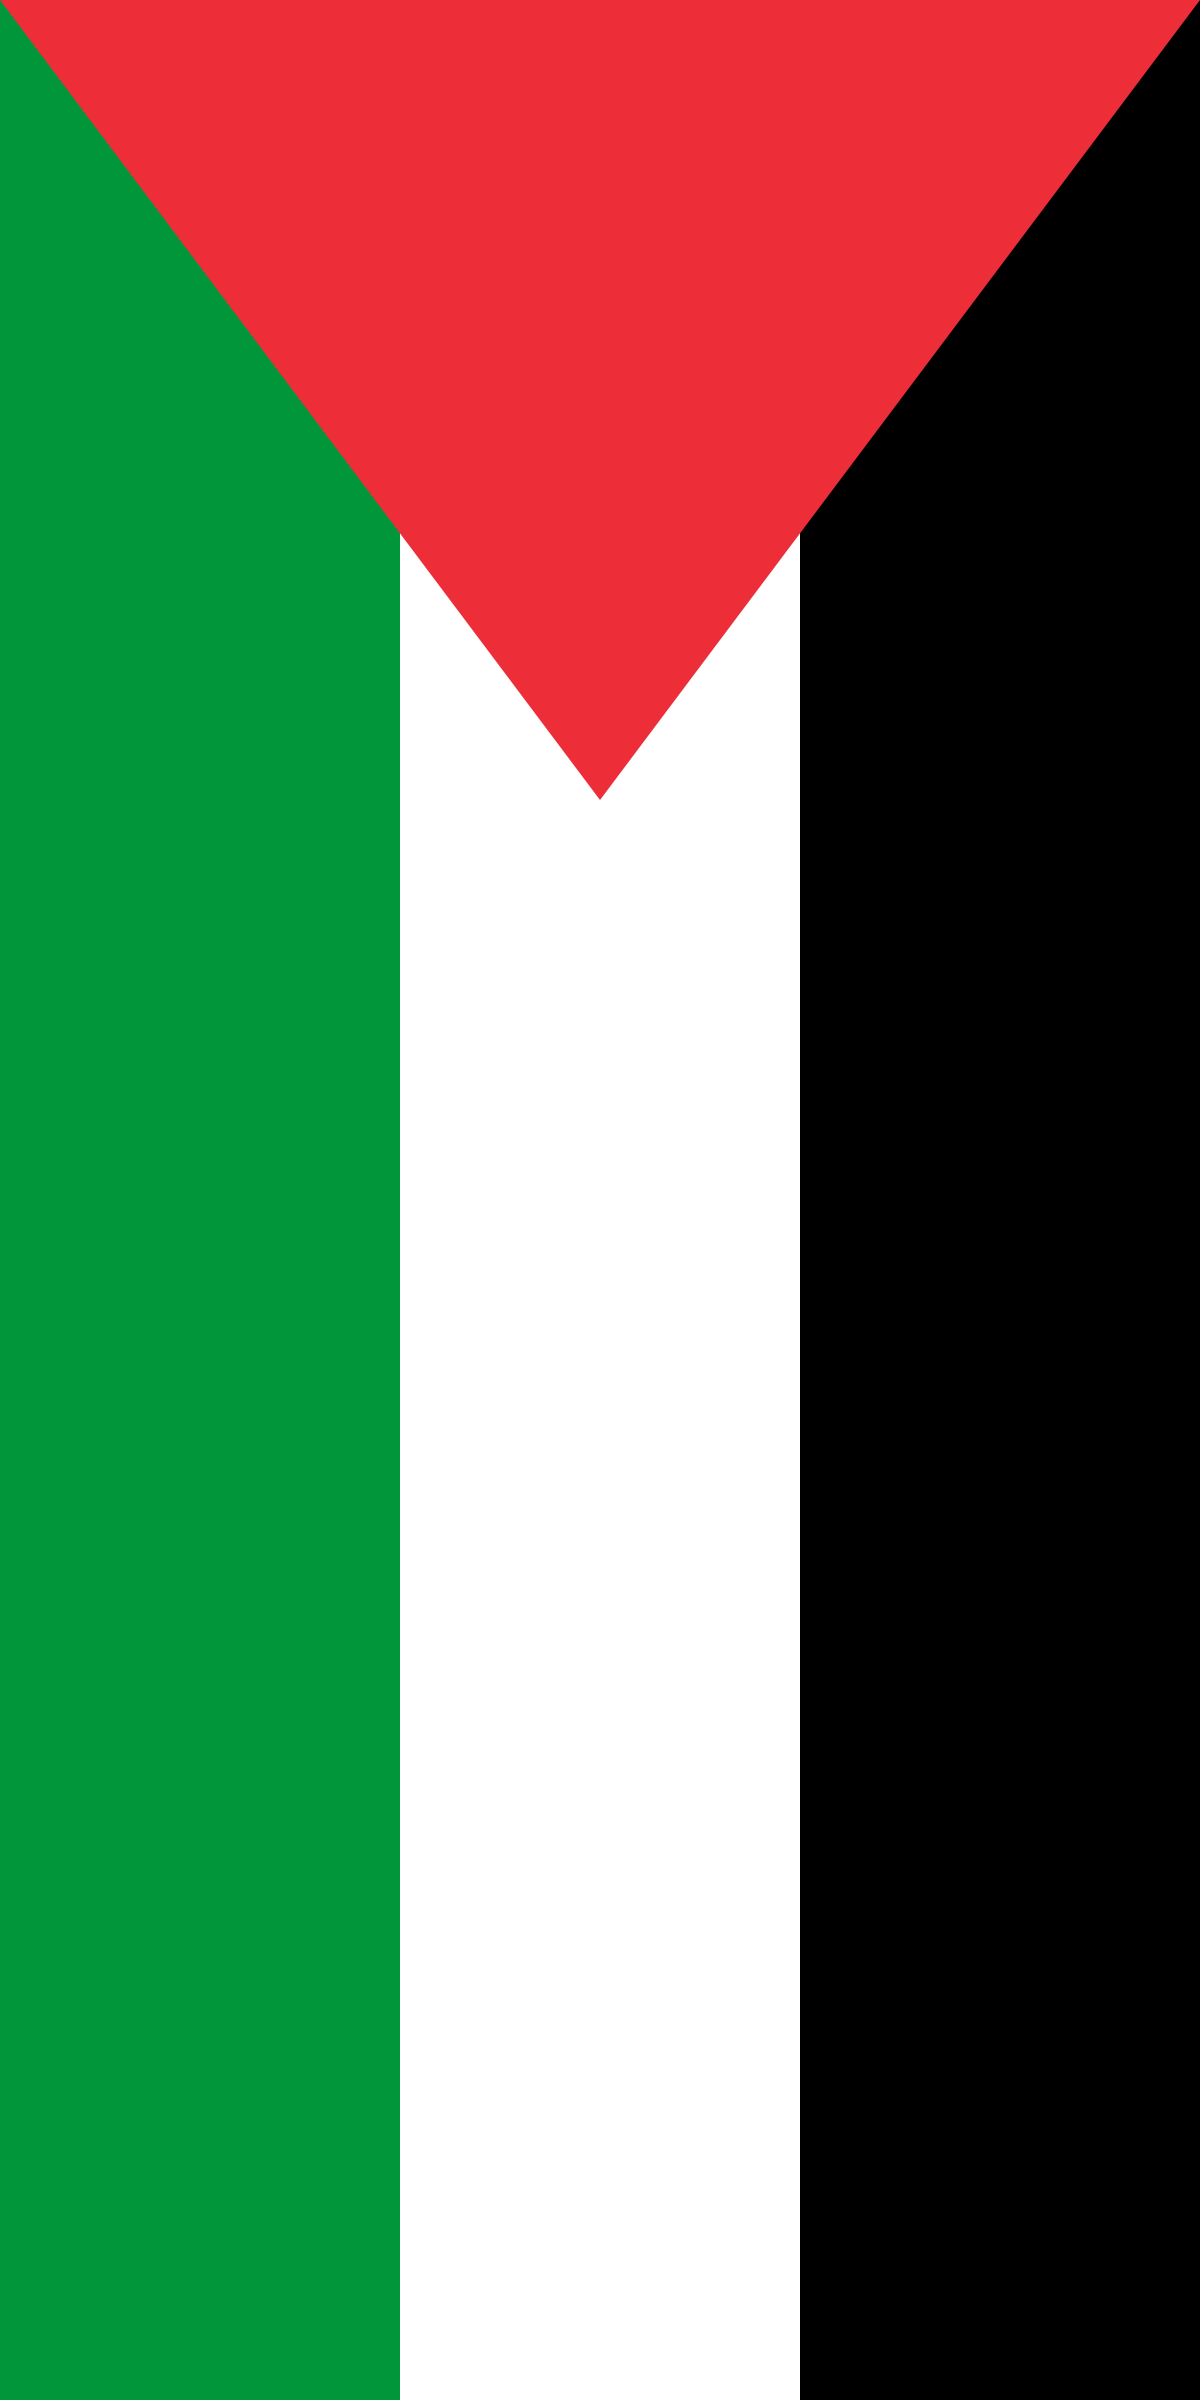 Download File:Flag of Palestine (vertical).svg - Wikimedia Commons